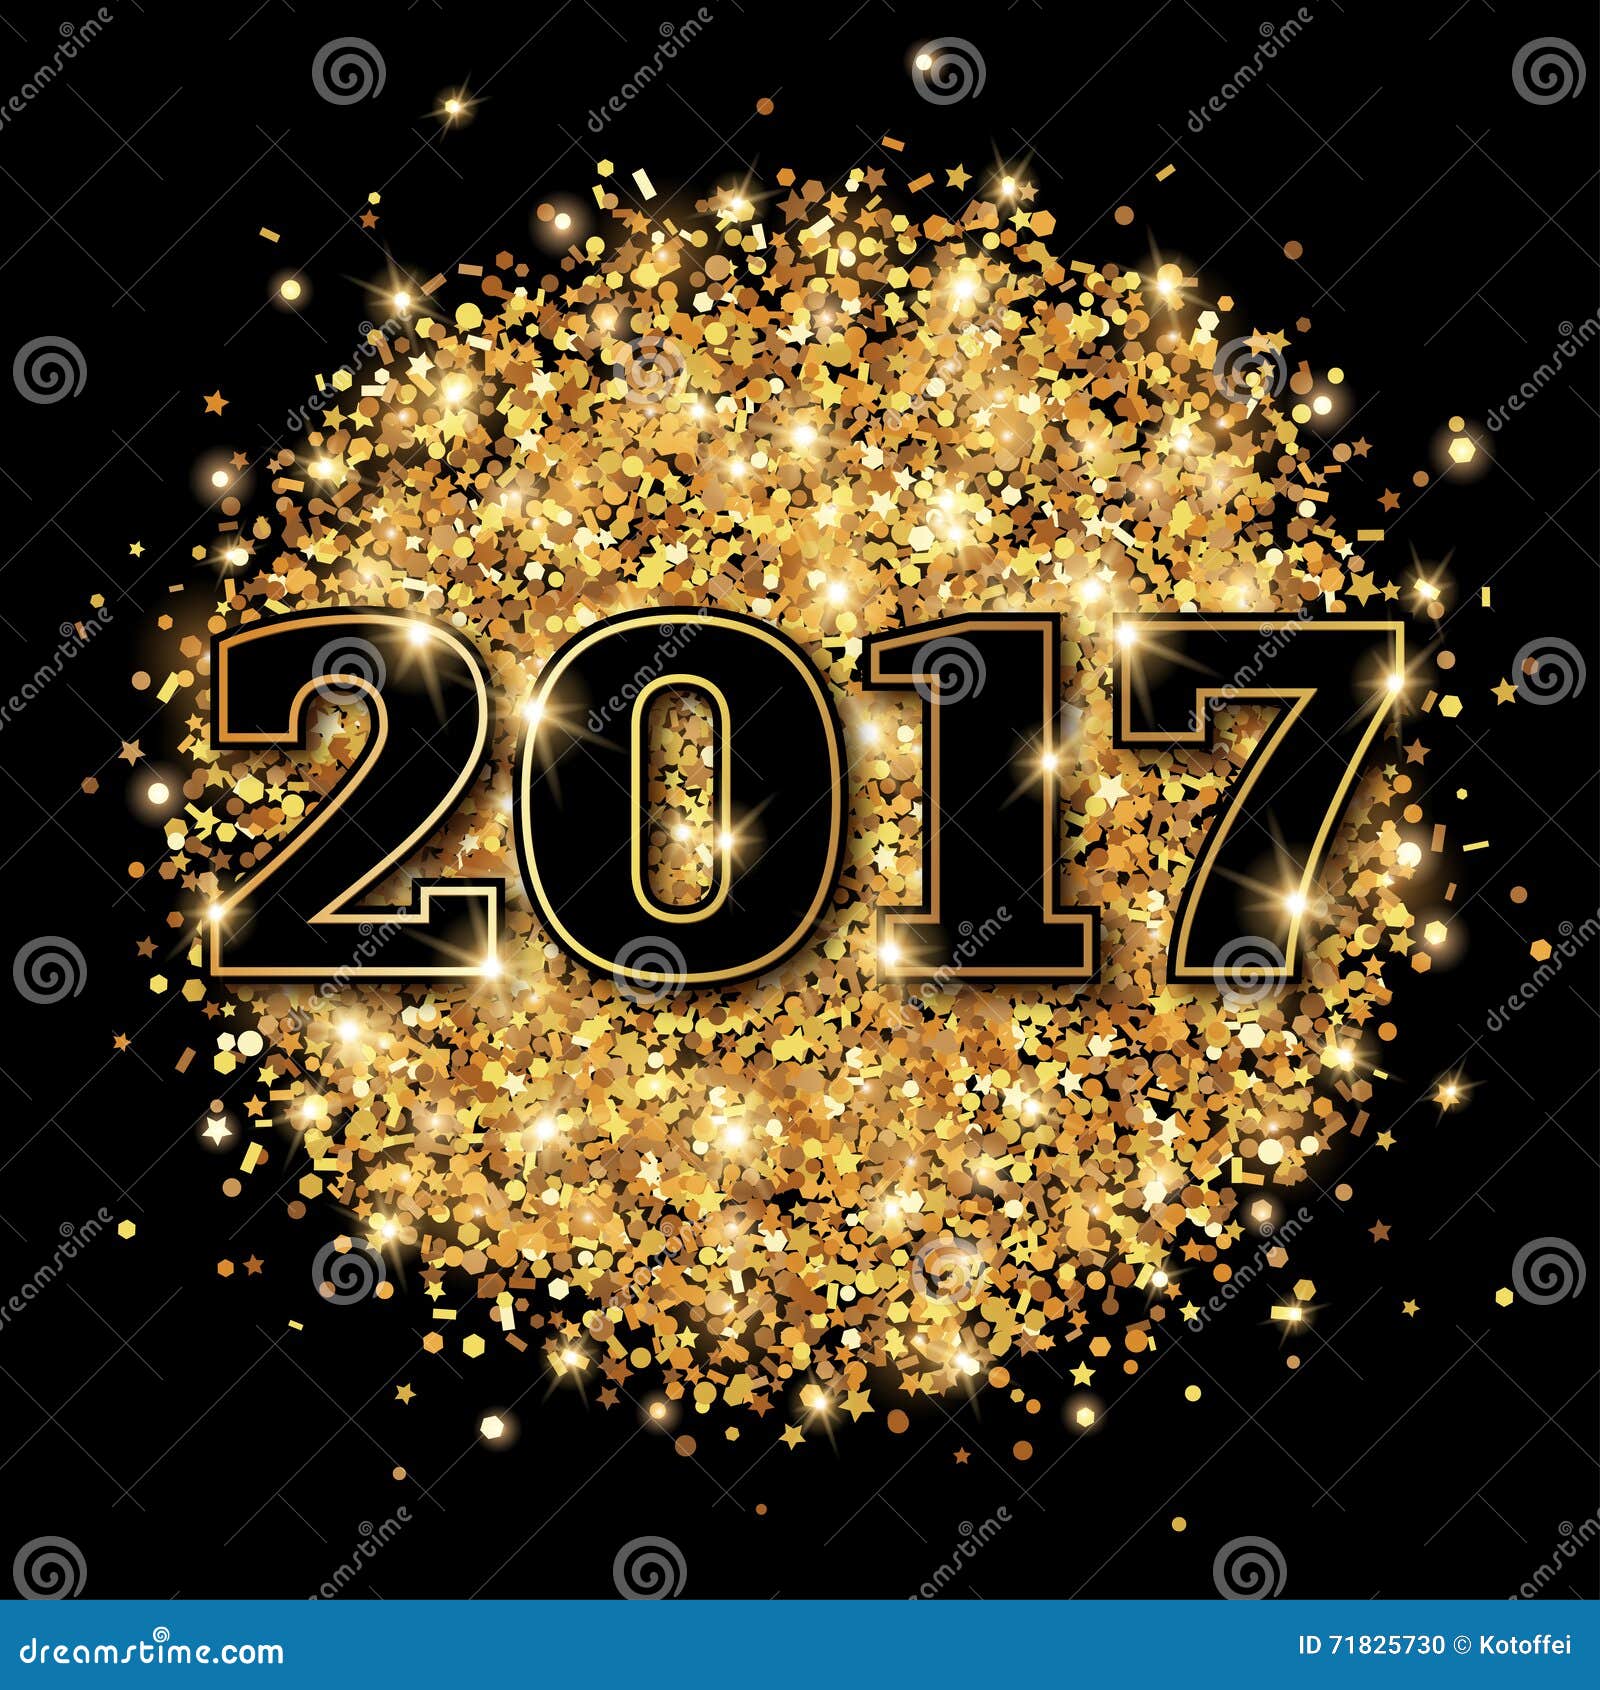 New Year 2017 Greeting Card Black Background. Vector ...